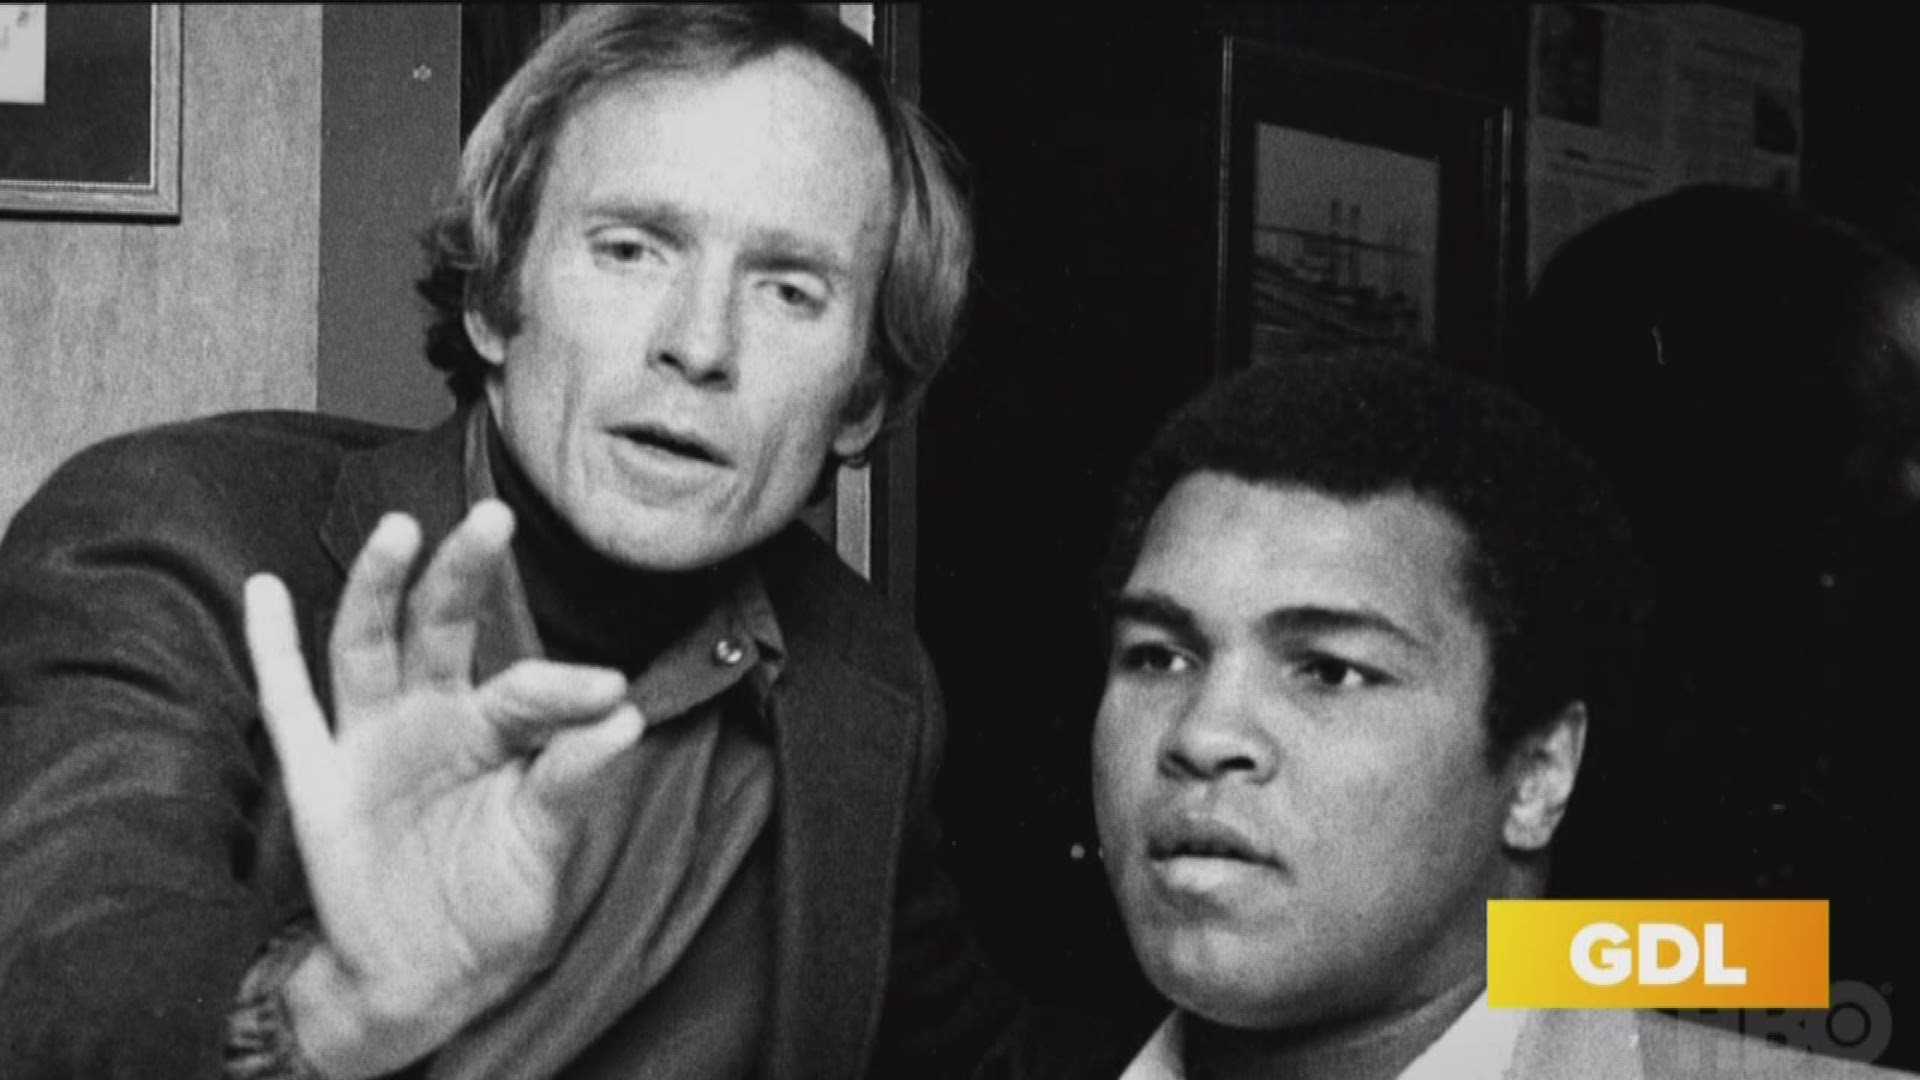 The screening is Feb. 8 at the Muhammad Ali Center, followed by a Q&A session with Dick Cavett. This segment is sponsored by the Muhammad Ali Center.